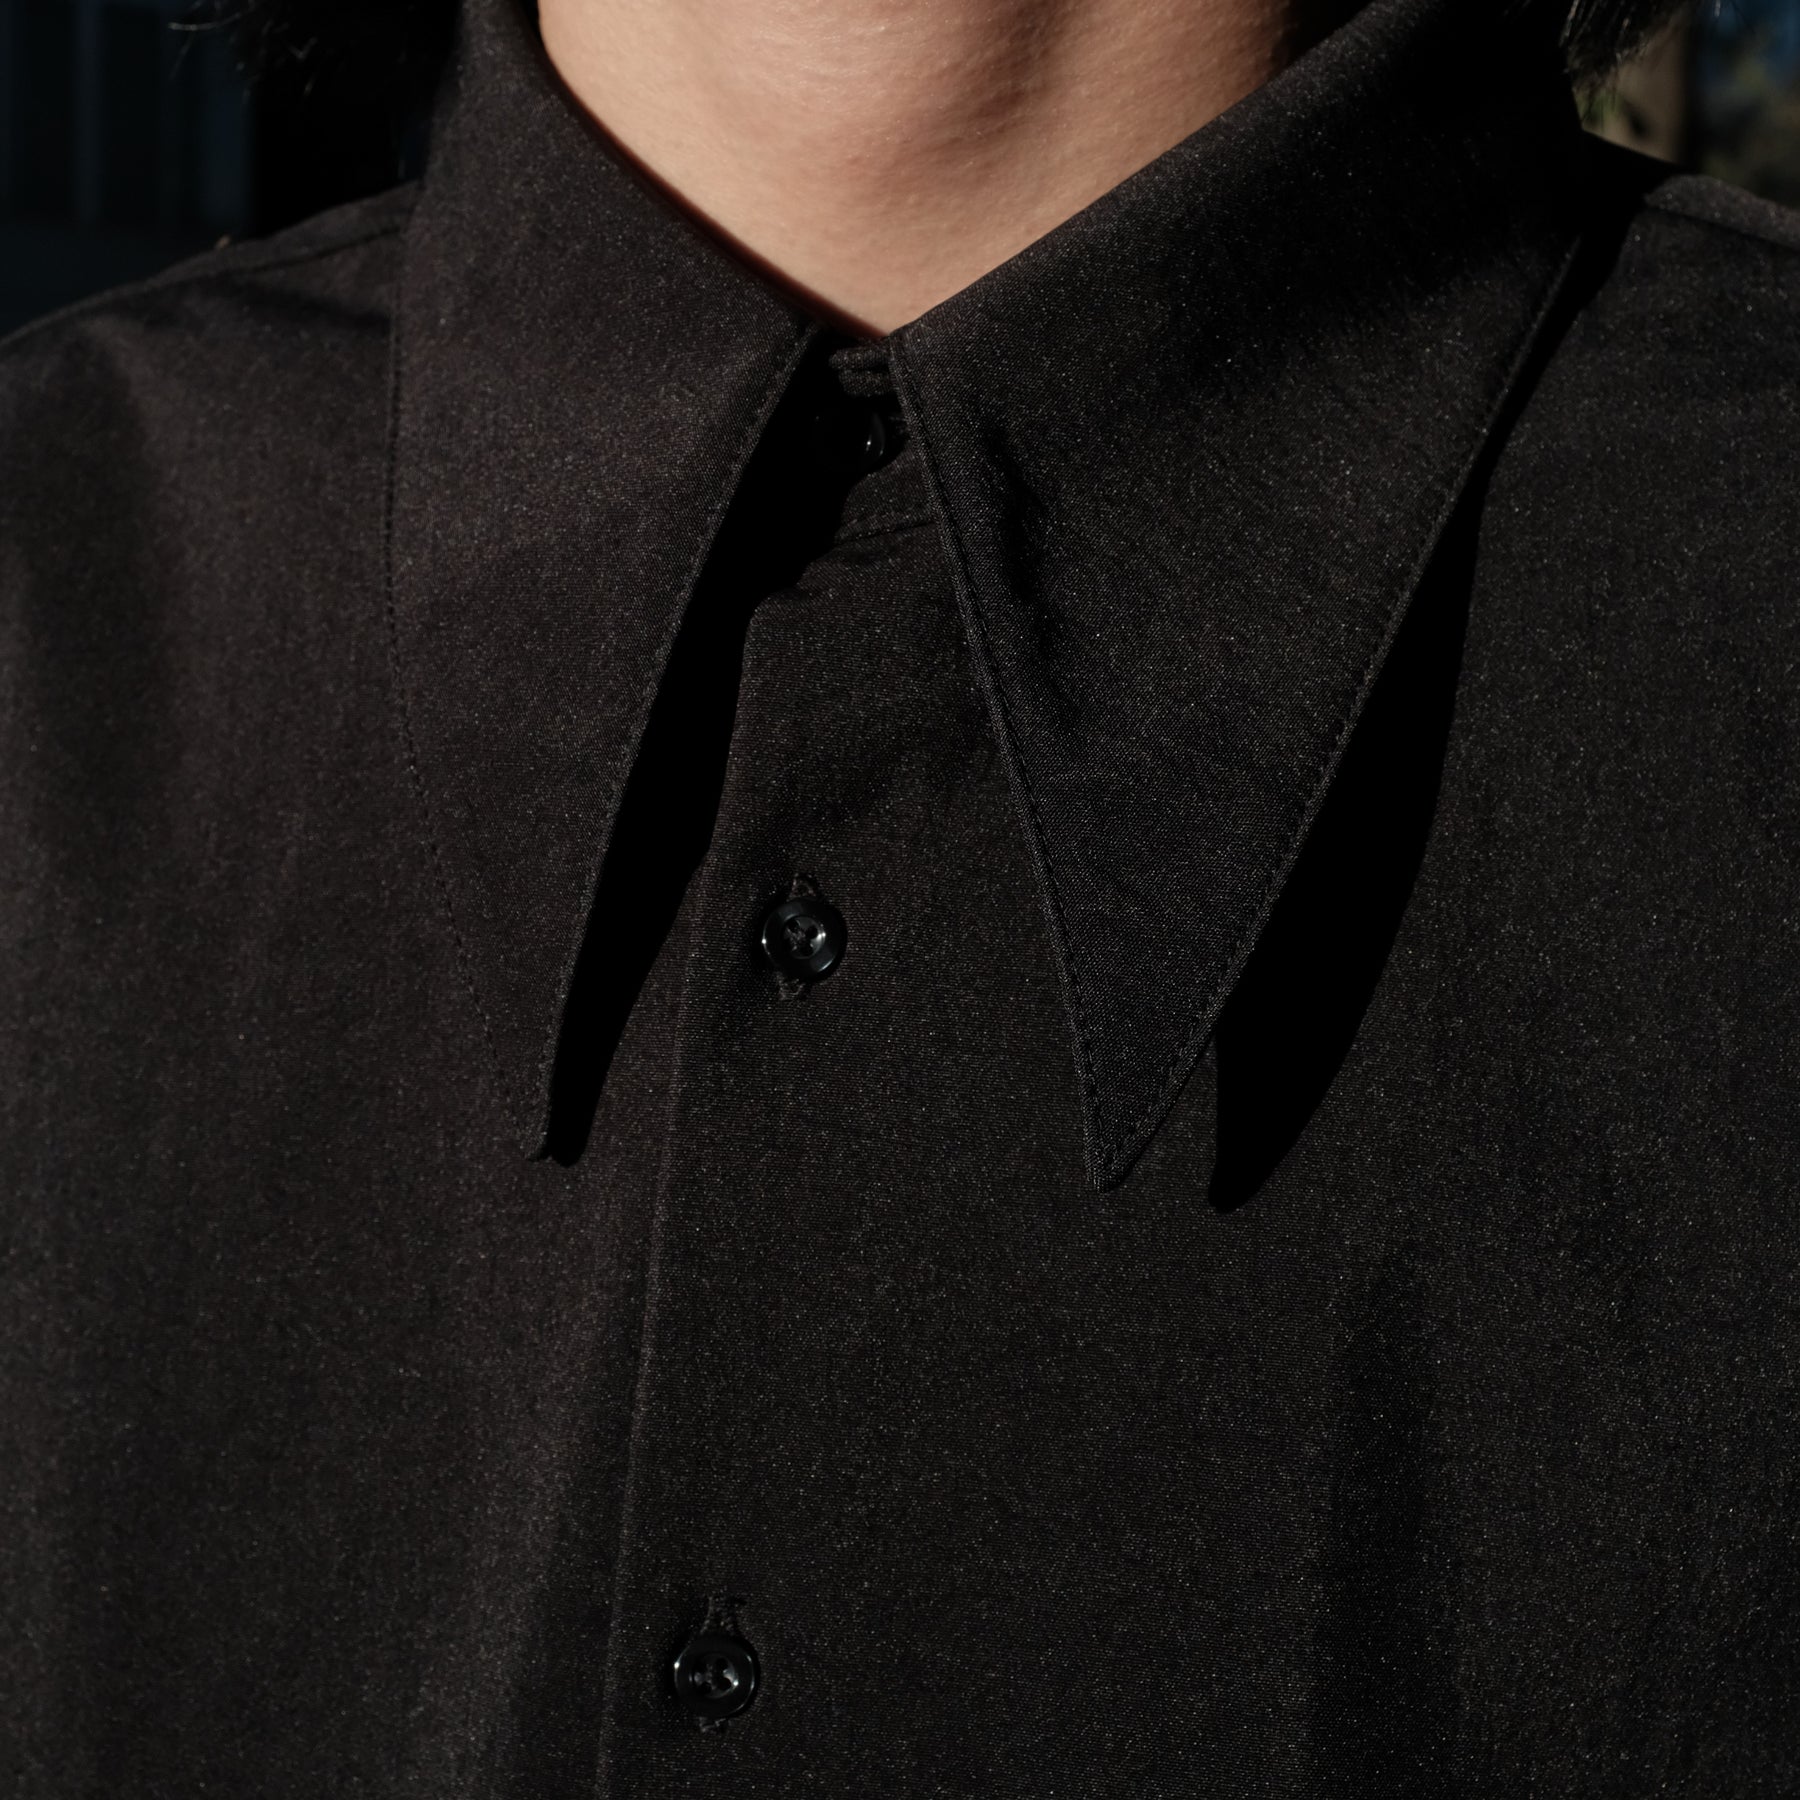 <span style="color: #ff2a00;">Last One</span> WILLY CHAVARRIA / POINT COLLAR SHIRT BLACK